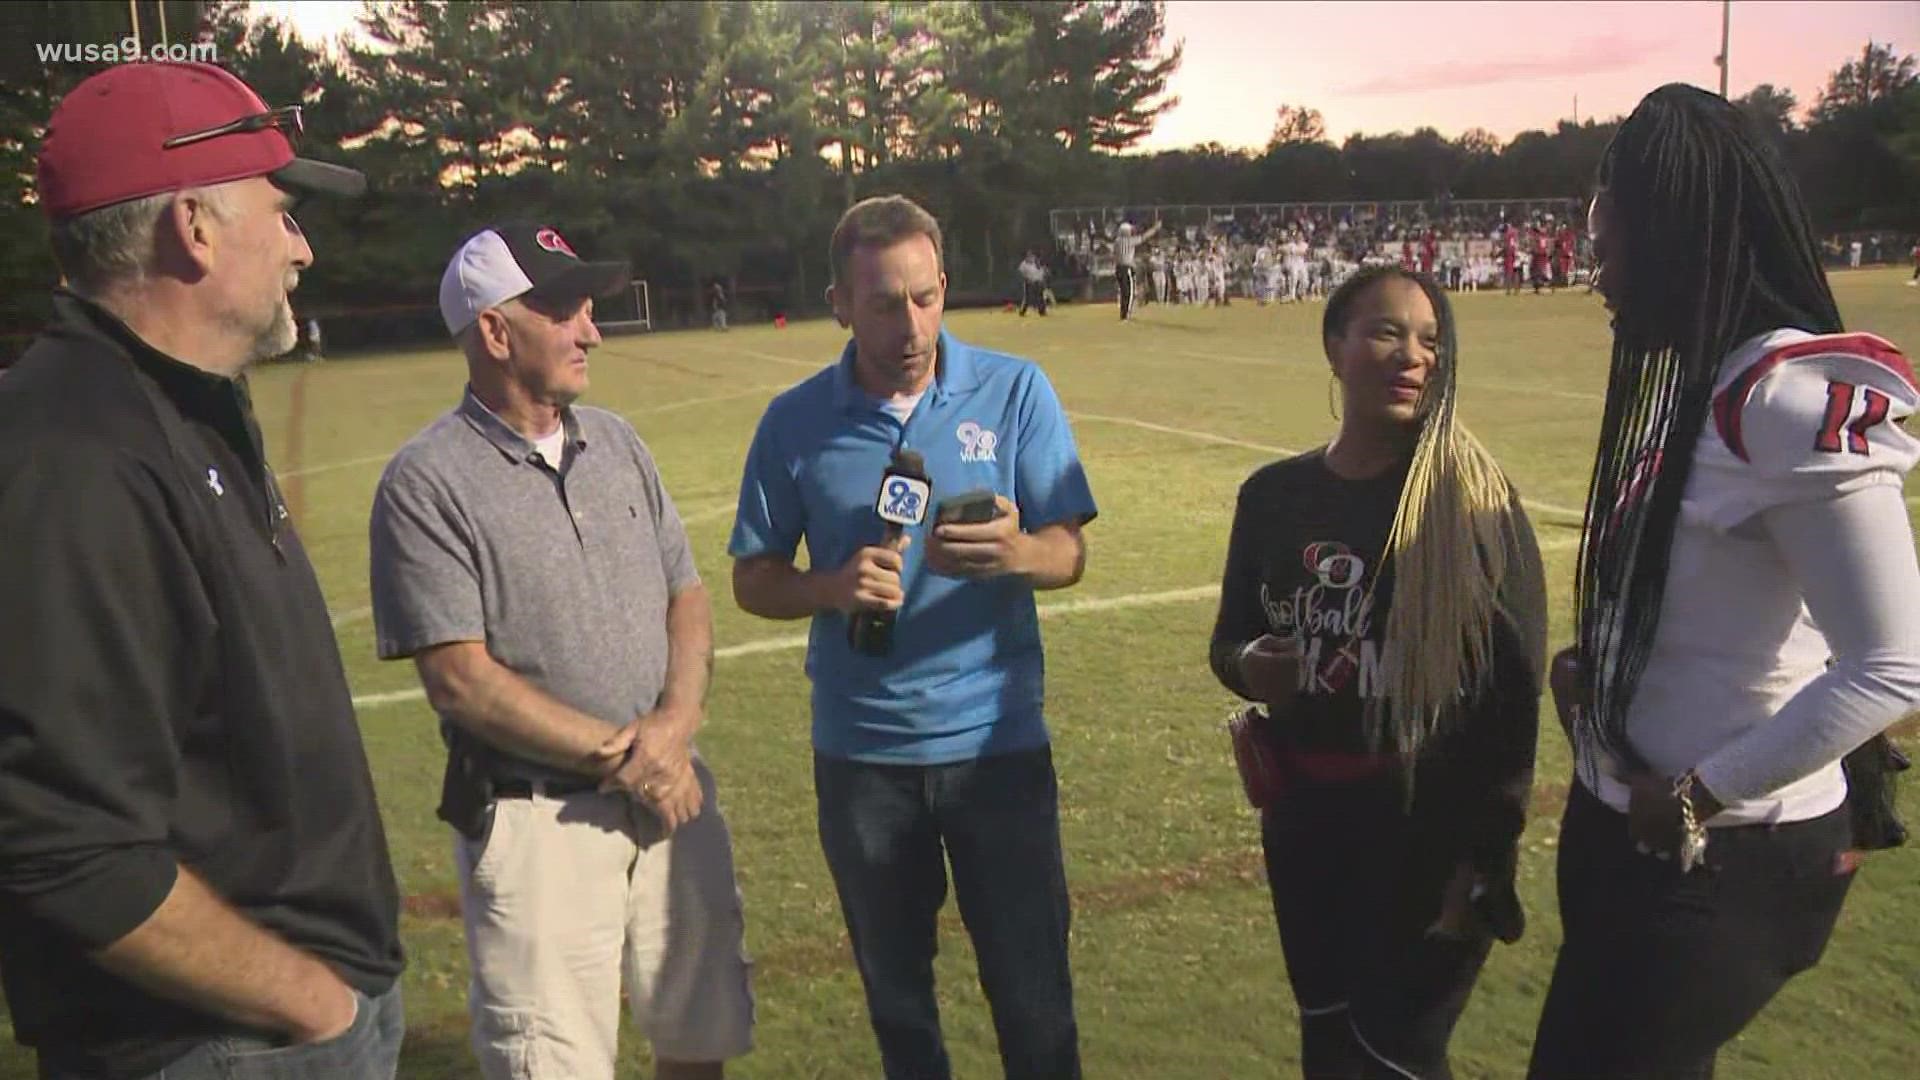 WUSA9 played some Gen Z trivia with parents at the Seneca Valley High School vs Quince Orchard High School Game of the Week!